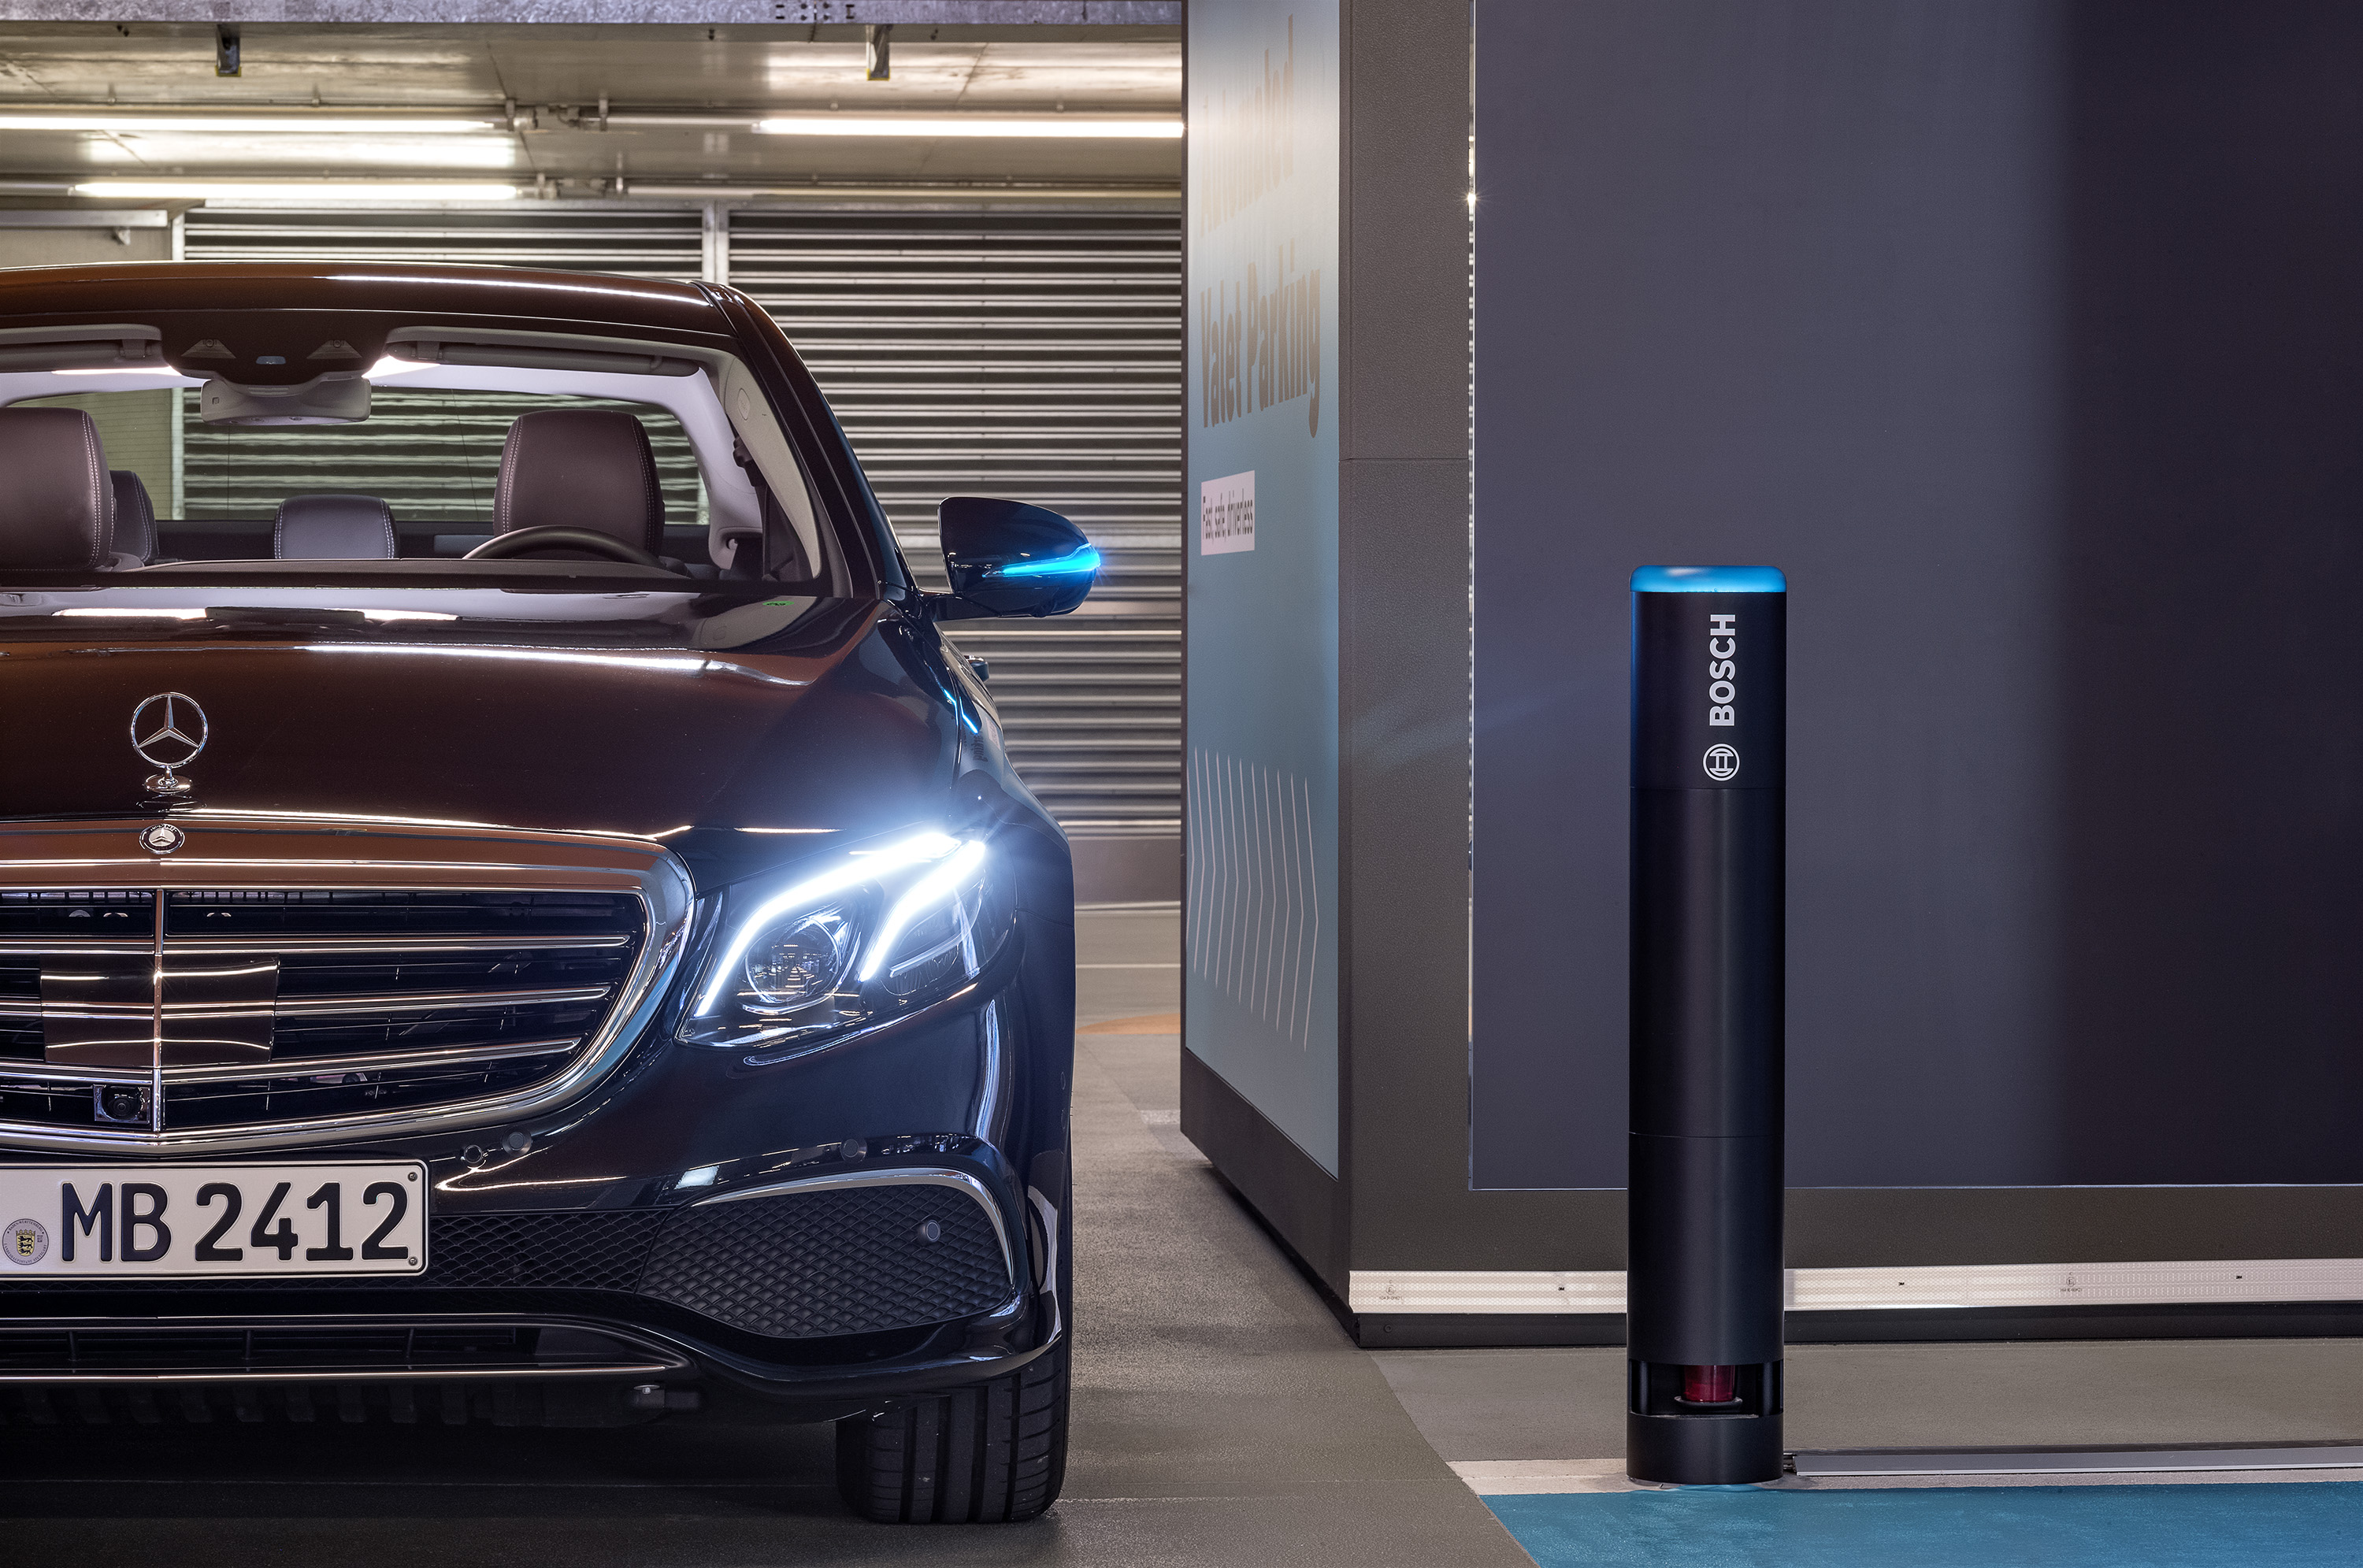 The parking garage of the future with automated valet parking